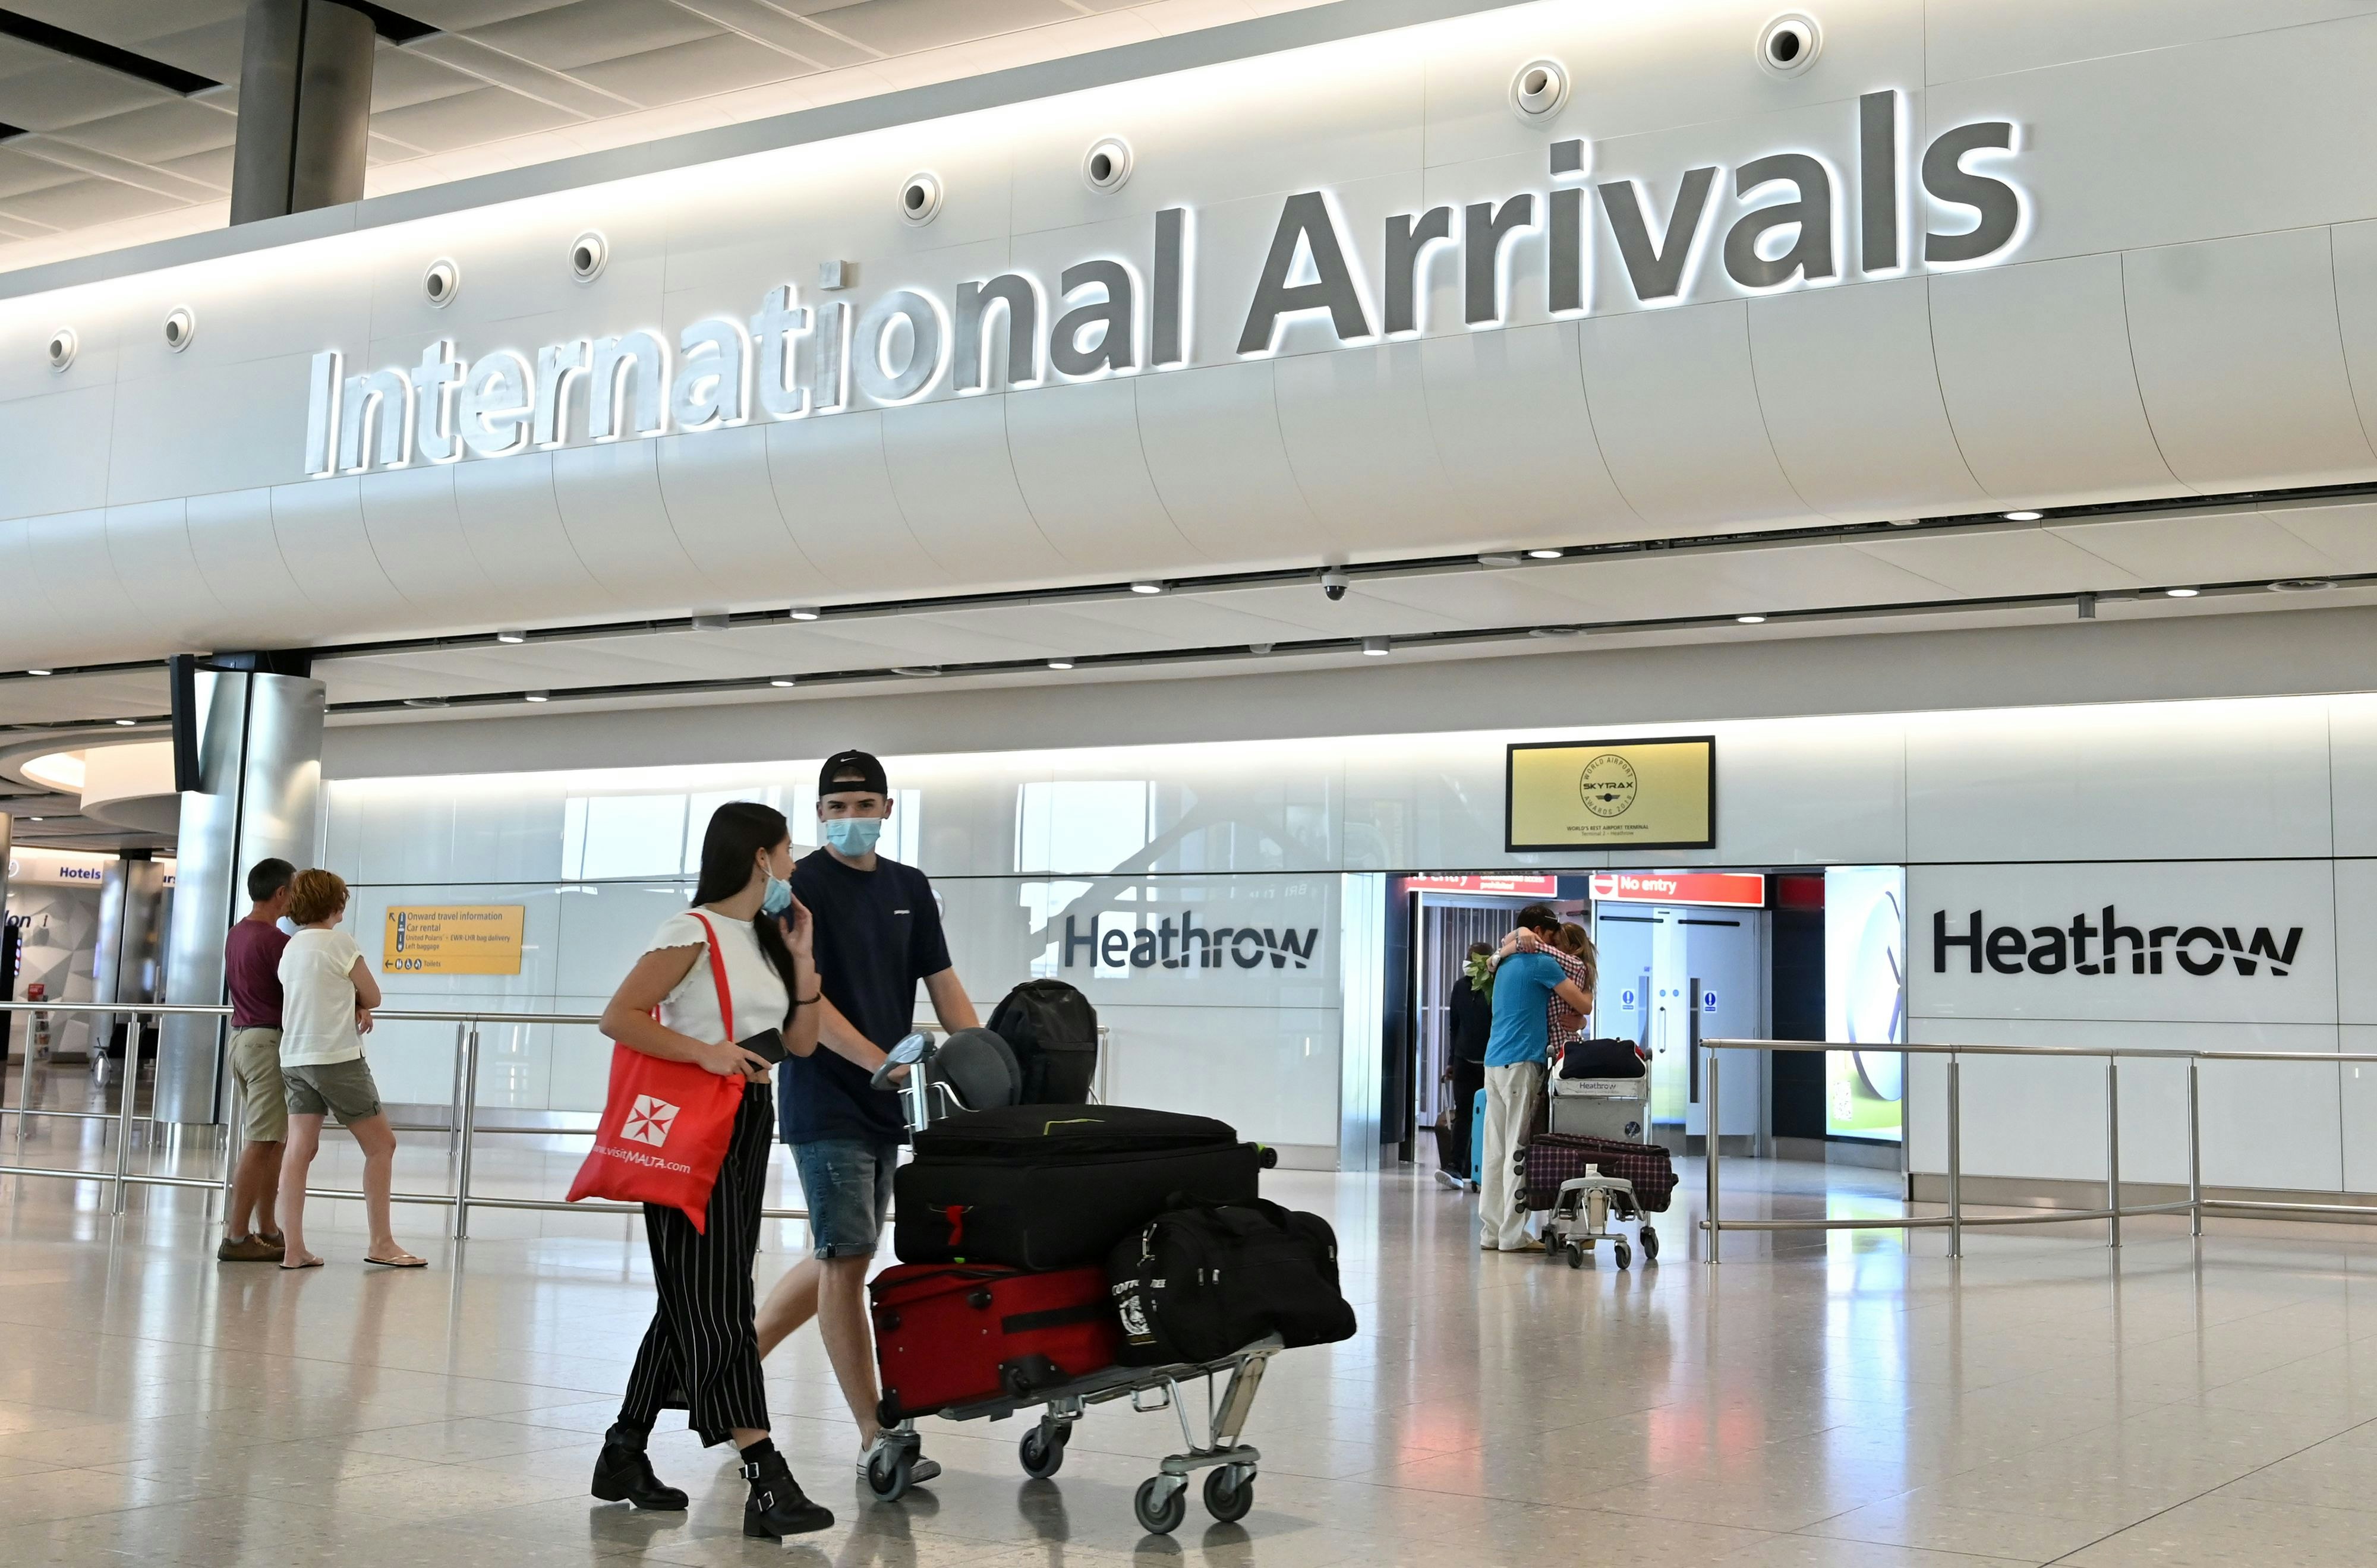 Passengers wearing PPE (personal protective equipment), including a face mask as a precautionary measure against COVID-19, walk through the arrivals hall after landing at at Terminal Two of London Heathrow Airport in west London, on May 9, 2020. - Britain could introduce a 14-day mandatory quarantine for international arrivals to stem the spread of coronavirus as part of its plan to ease the lockdown, an airline association said Saturday, sparking alarm in an industry already badly hit by the global pandemic. (Photo by JUSTIN TALLIS / AFP) (Photo by JUSTIN TALLIS/AFP via Getty Images)